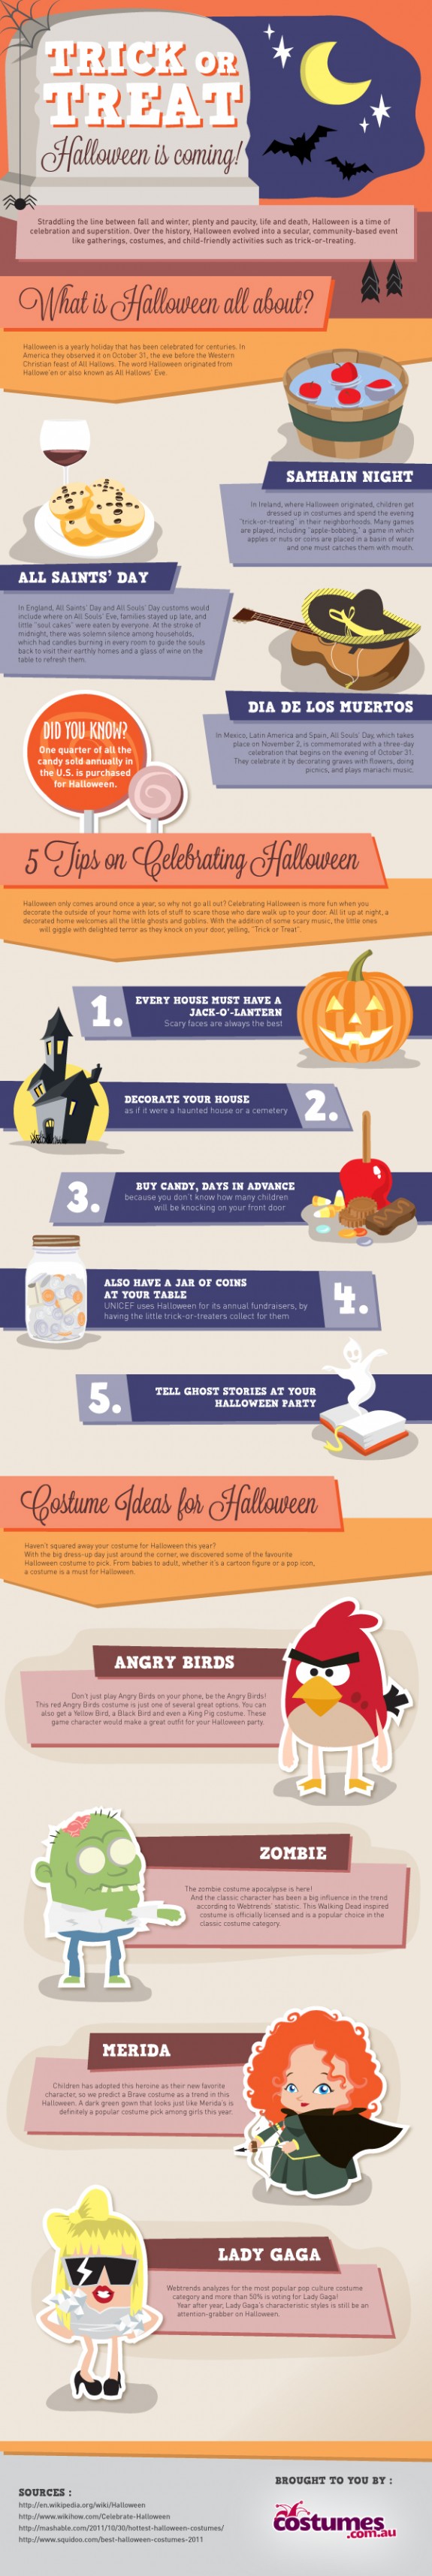 Infographic for Trick or Treat: A Halloween Infographic